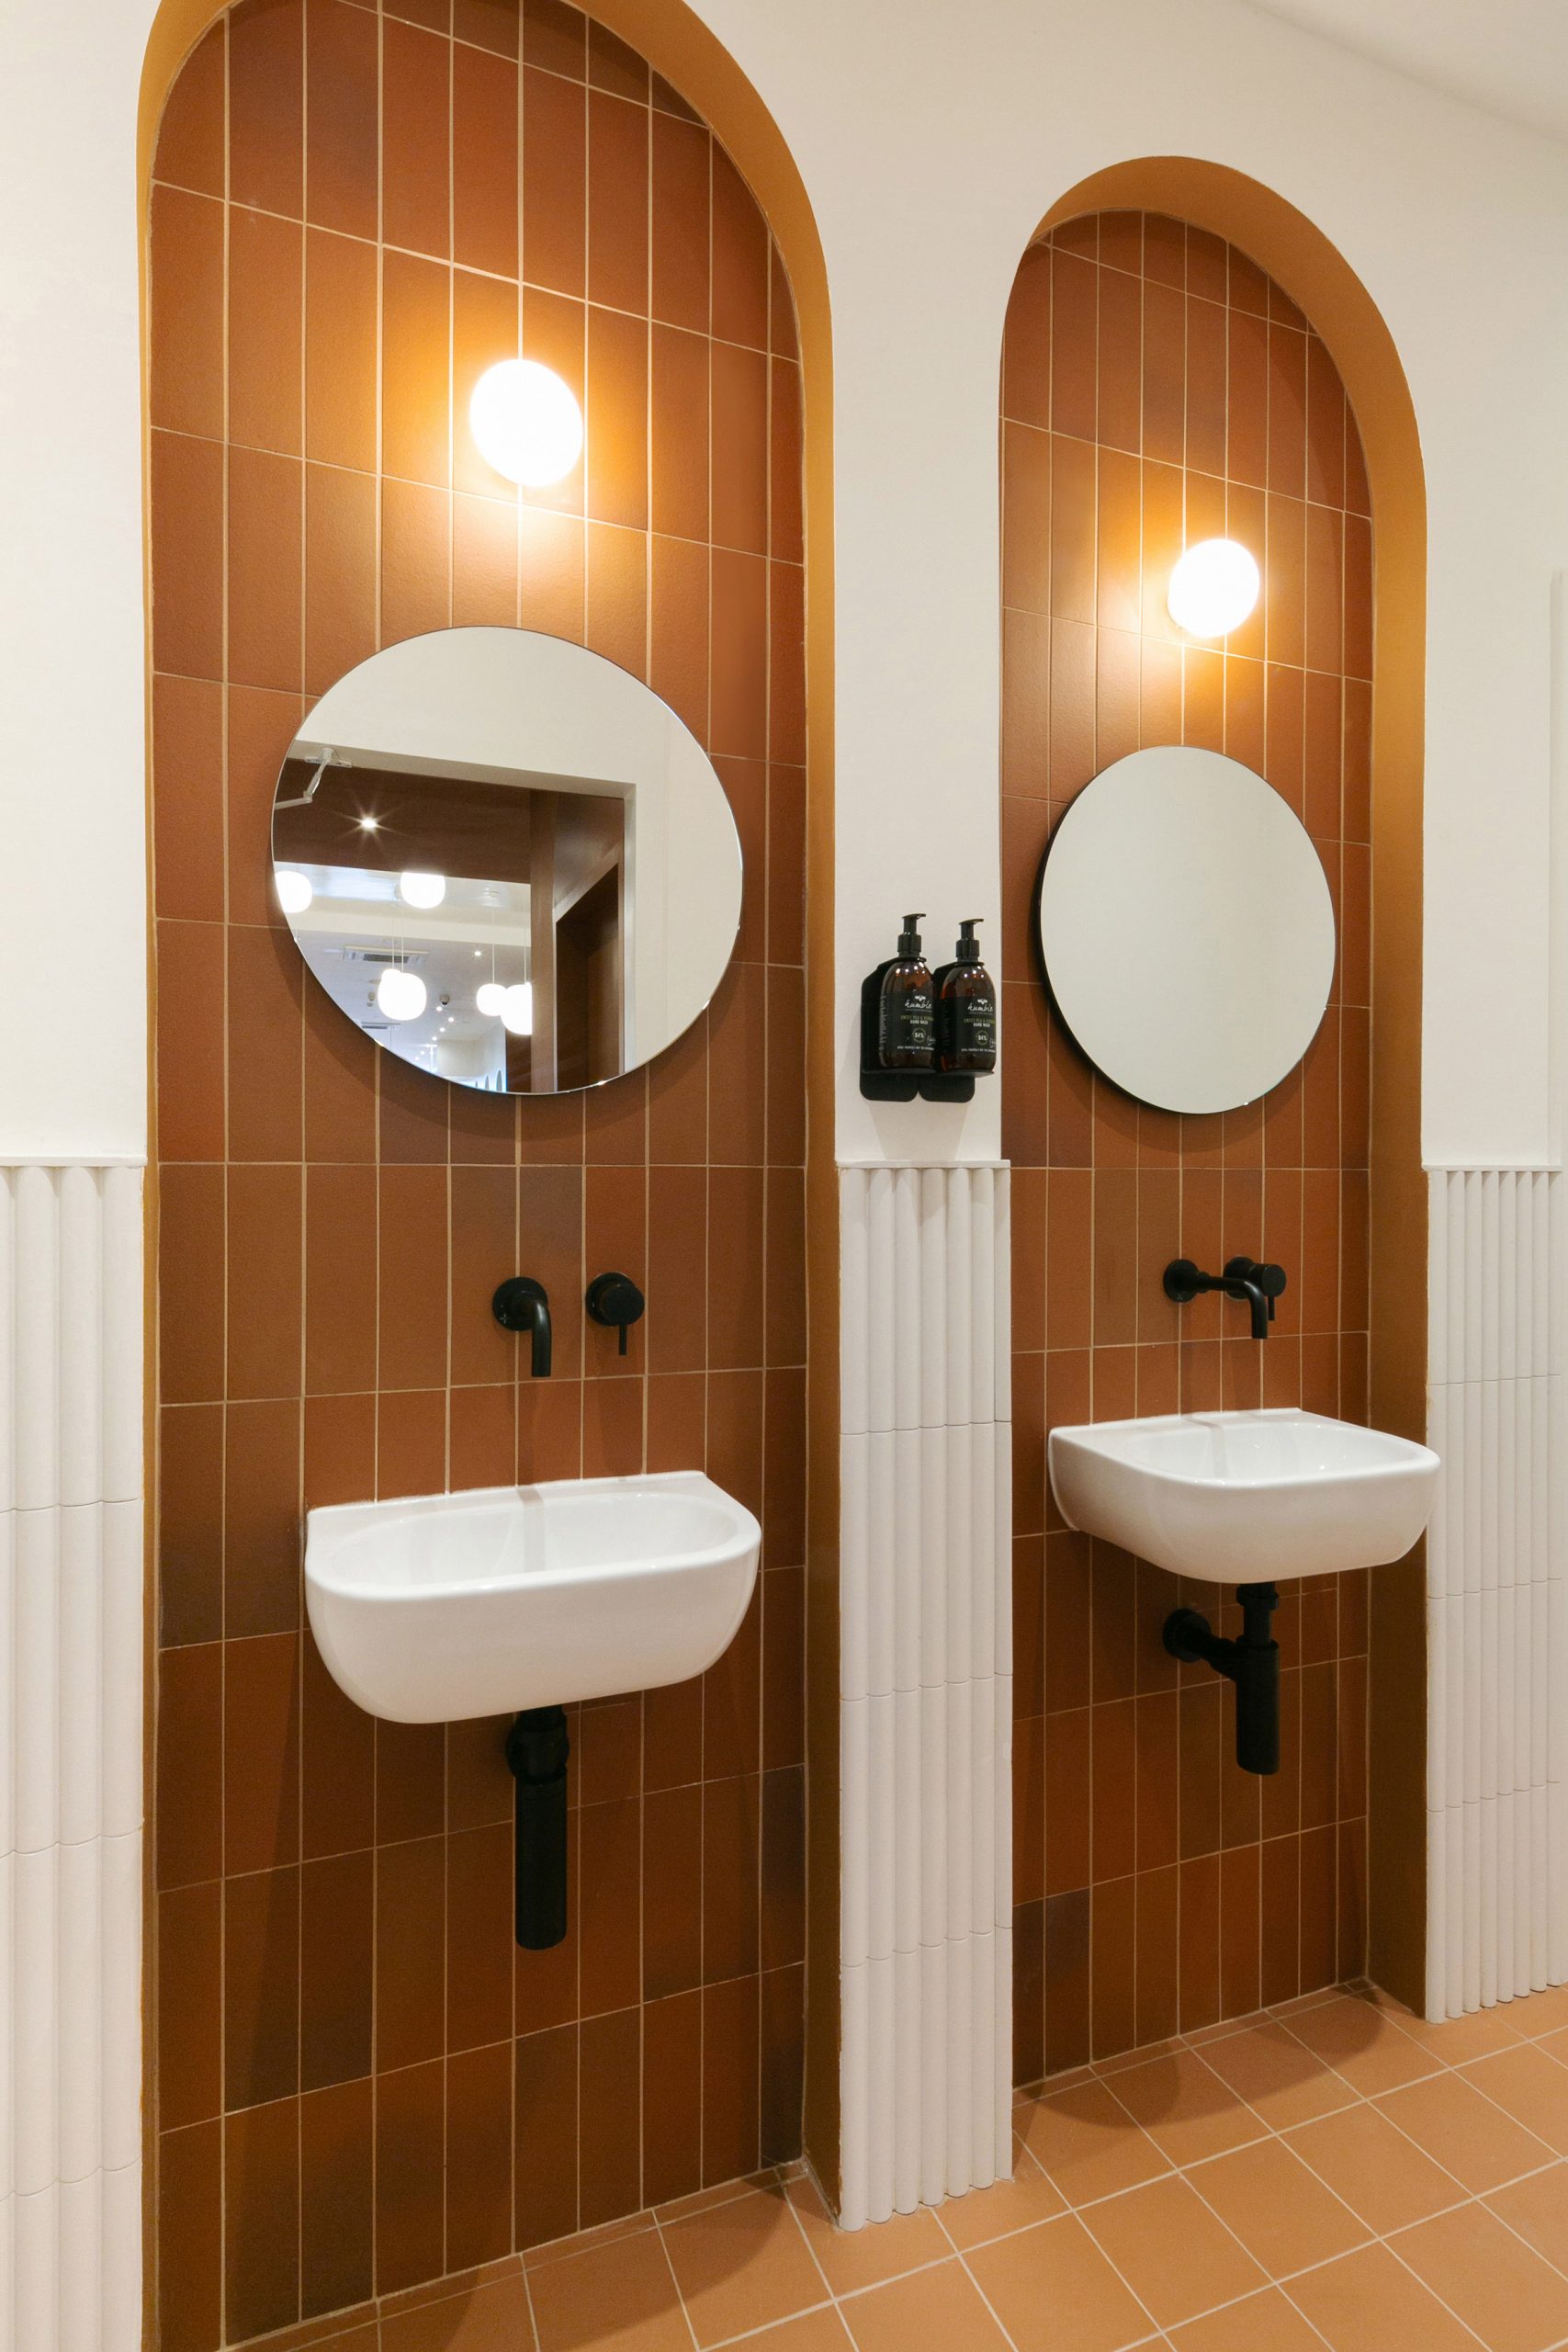 Bathrooms inside Beam cafe in London feature terracotta tiles